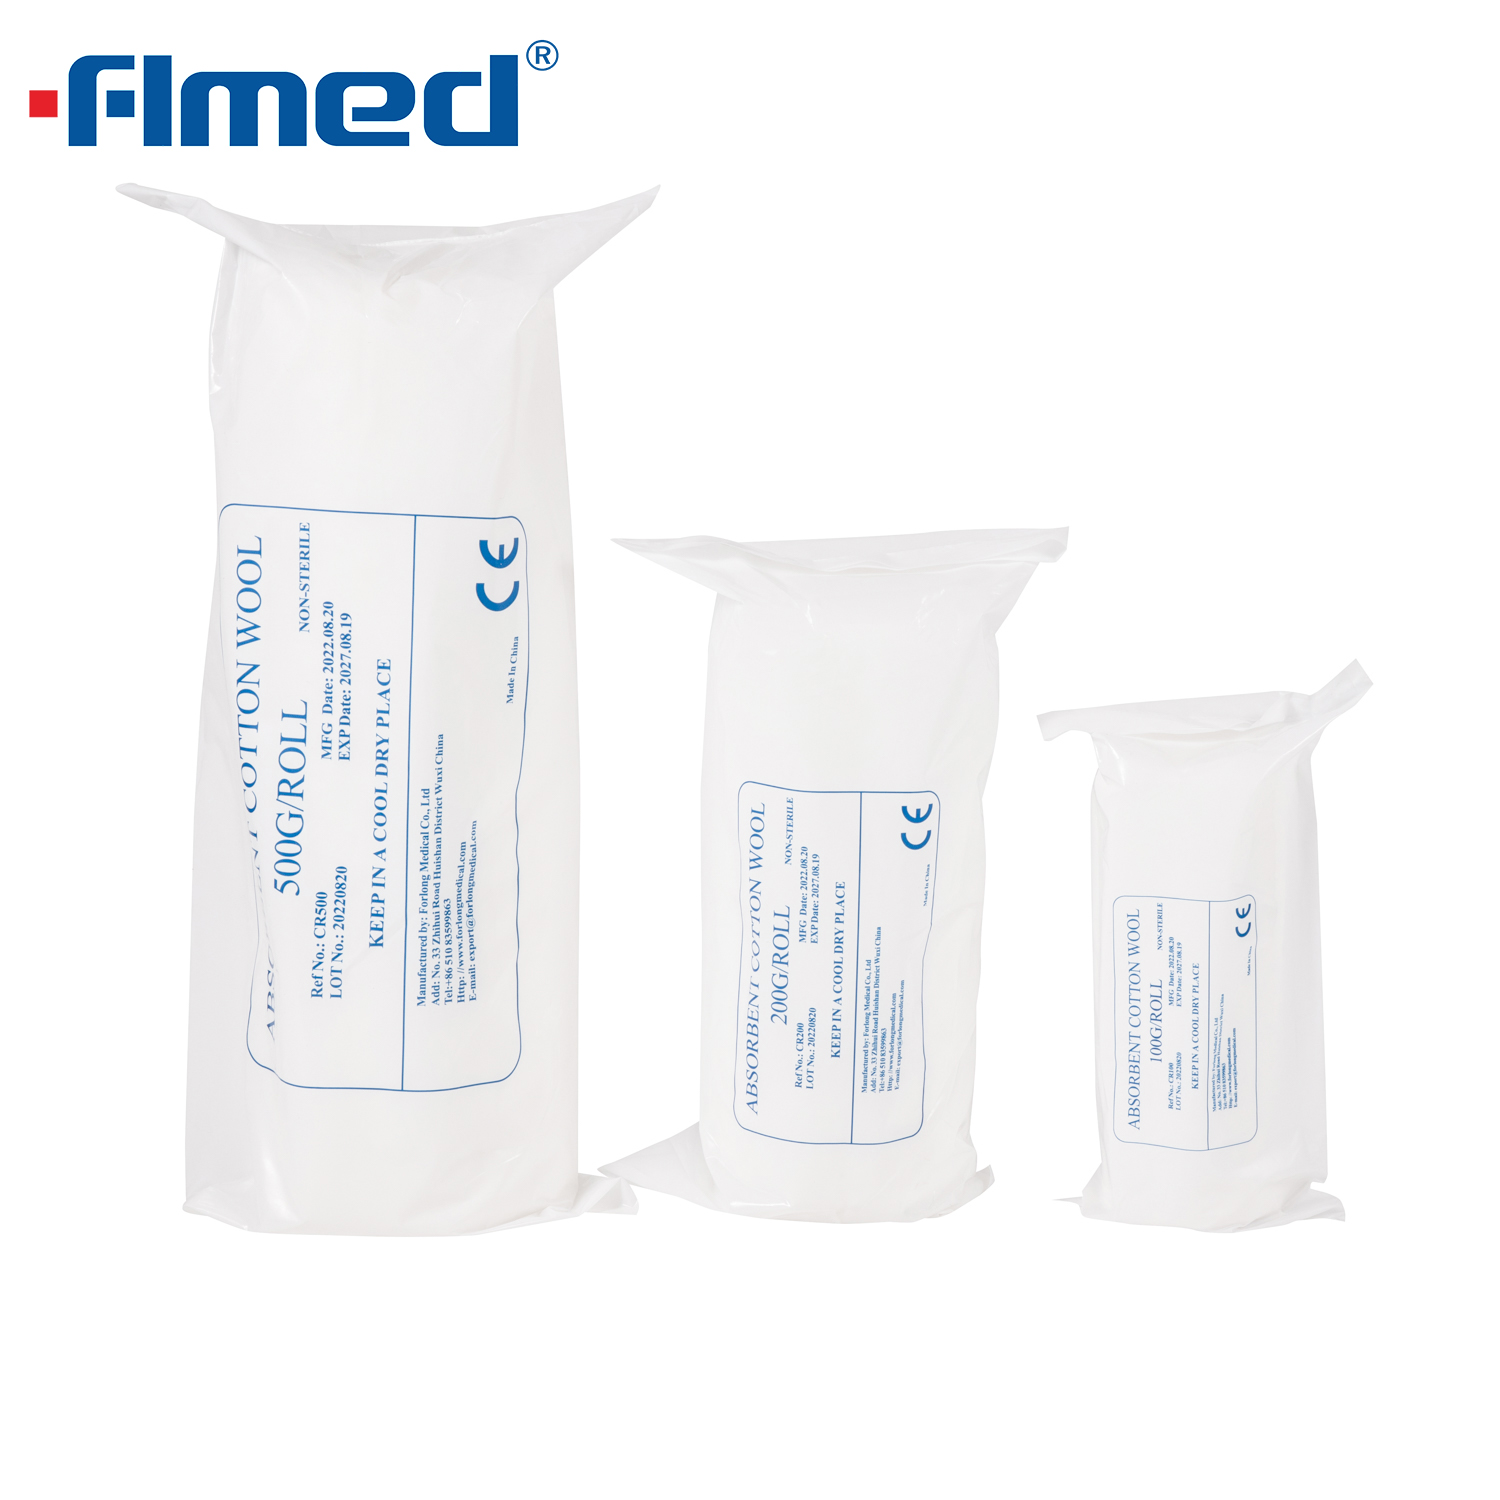 500g Absorbent Medical Cotton Wool Roll 